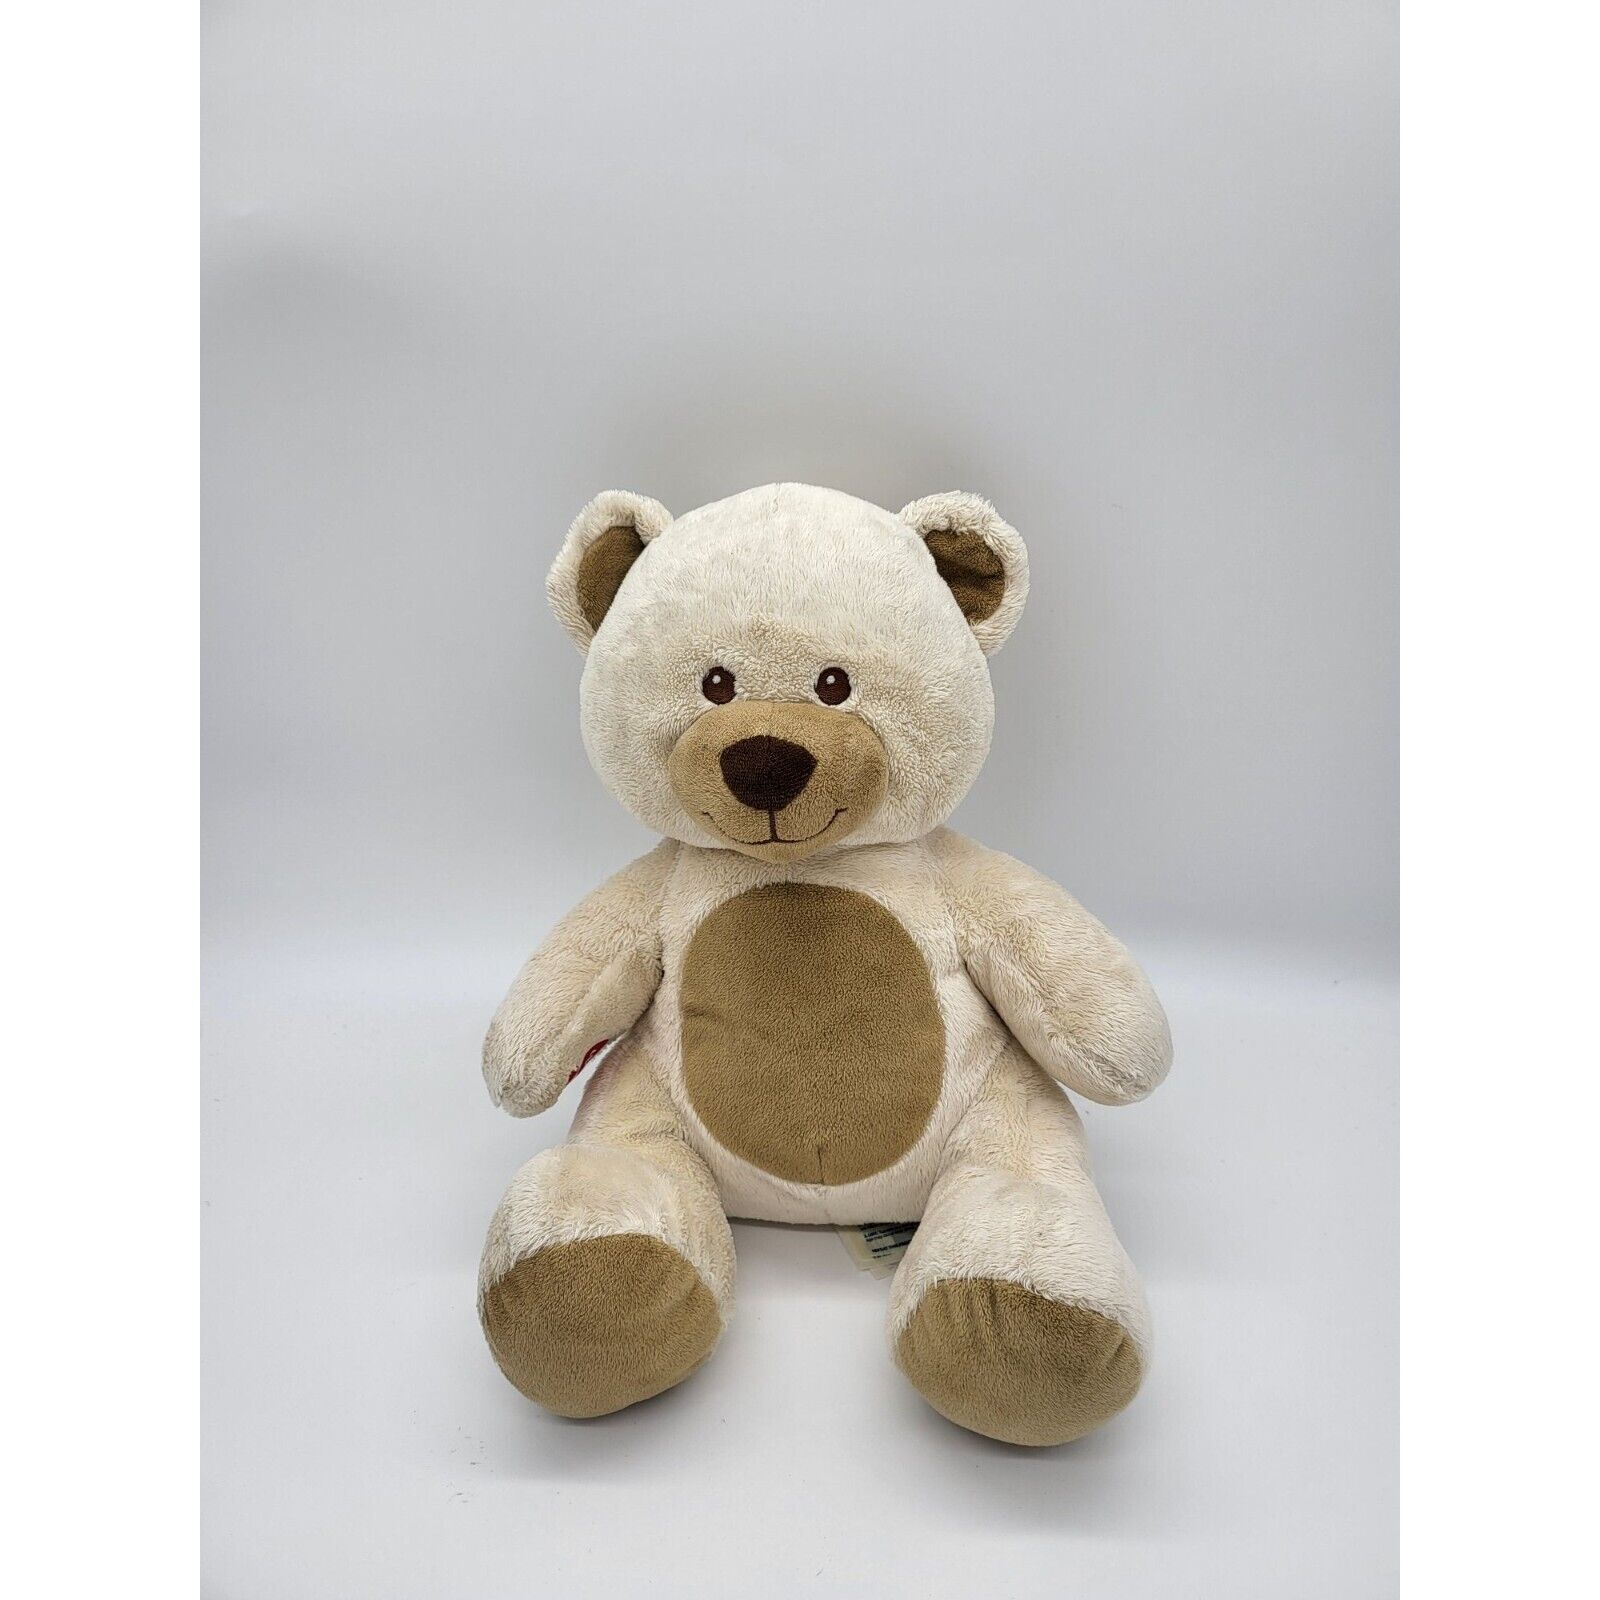 Primary image for Build A Bear Tan Plush Bear 14 Inch Stuffed Animal Kids Toy Two Toned Animal Zoo